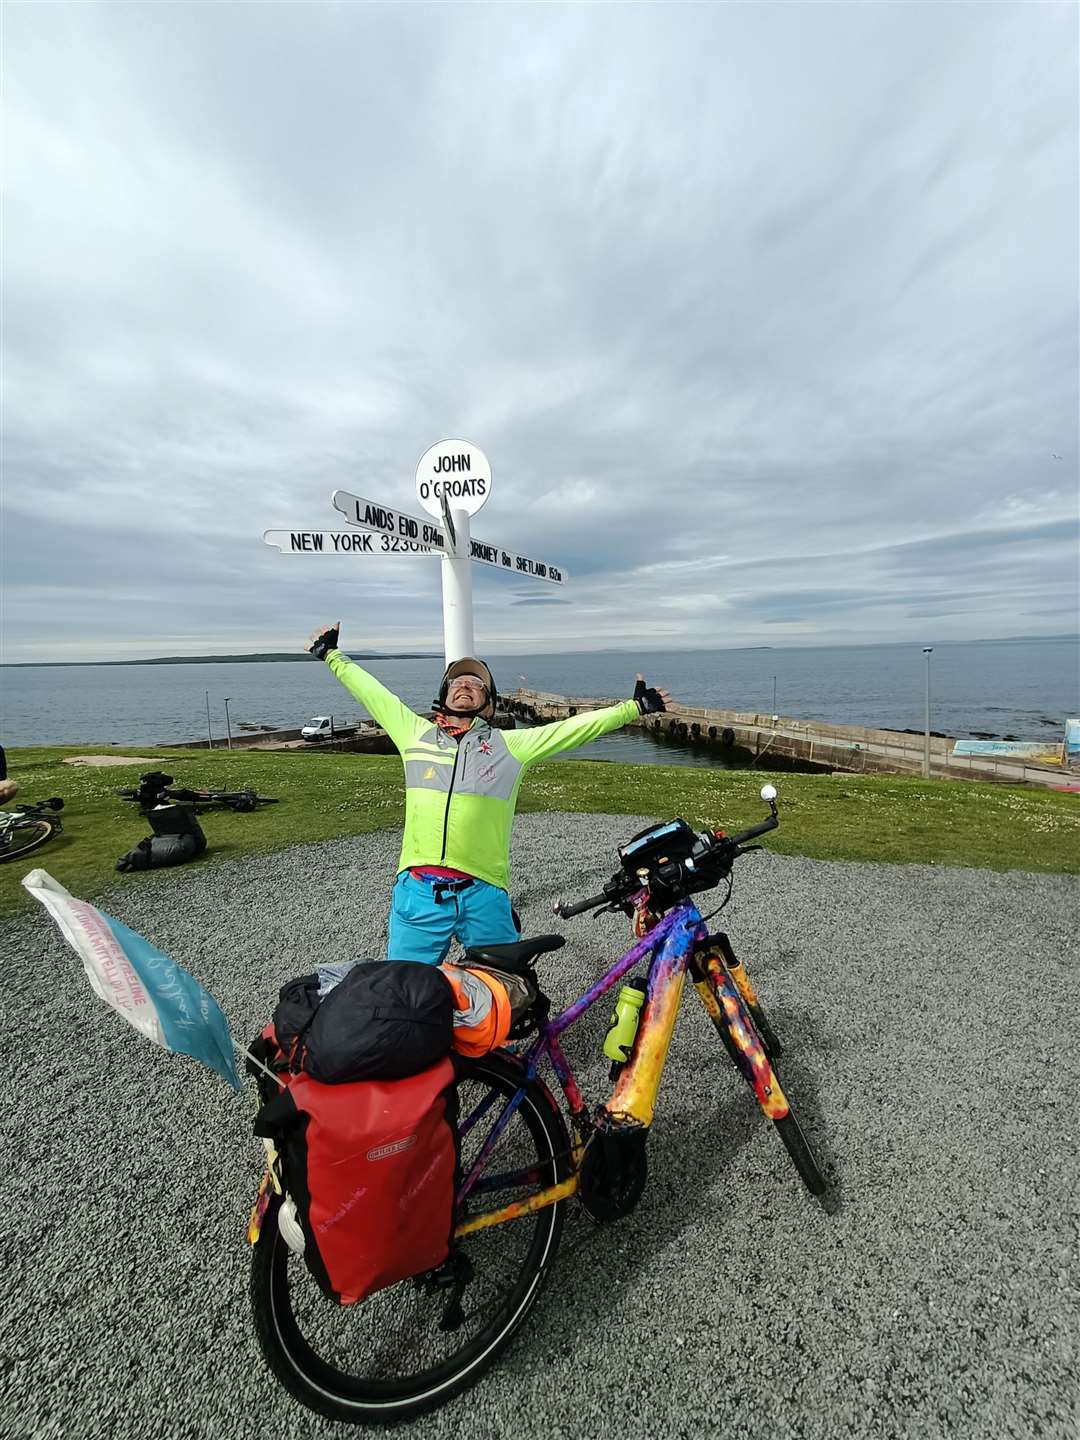 Timmy Mallett at John O'Groats during his 4500-mile tour of the British coast.